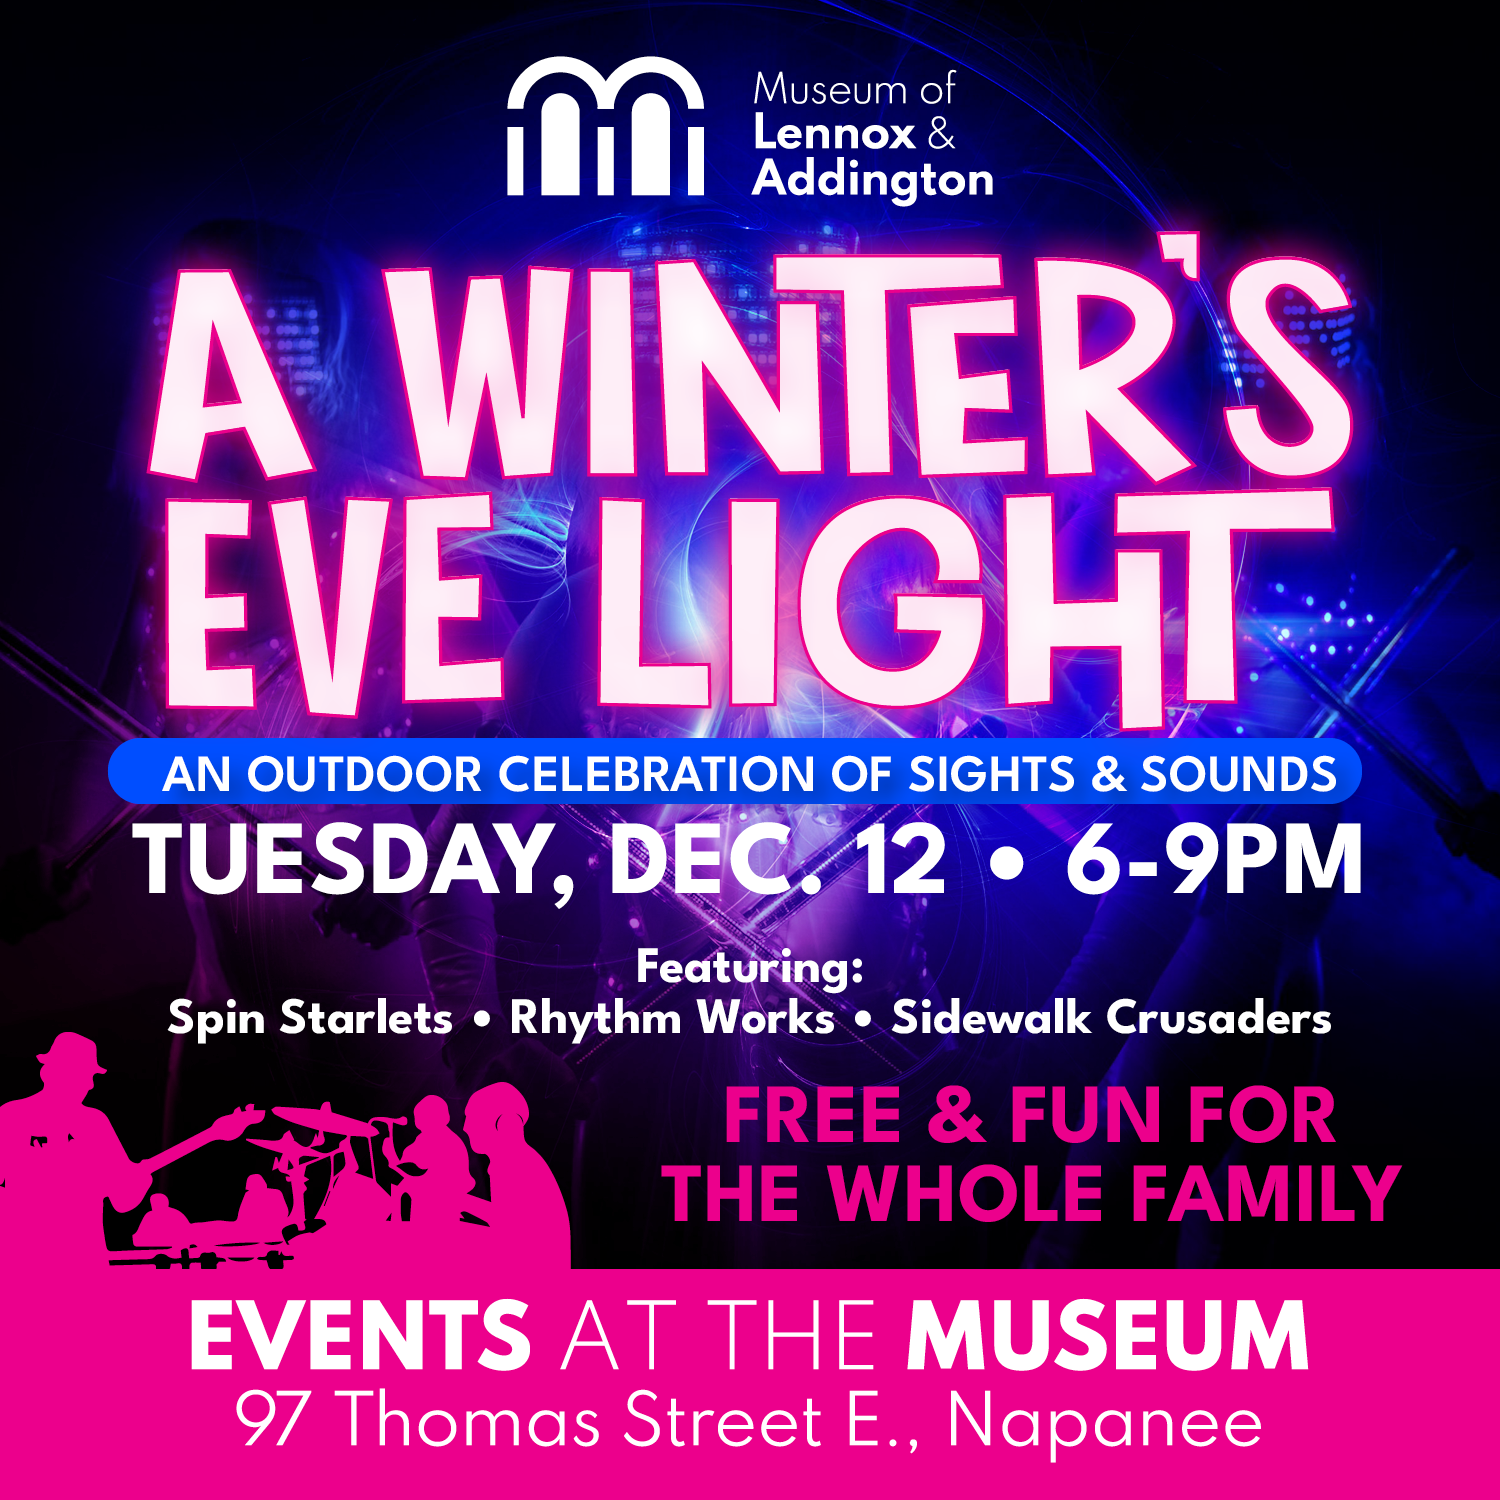 Poster for A Winter's Eve Light at the Museum of Lennox and Addington